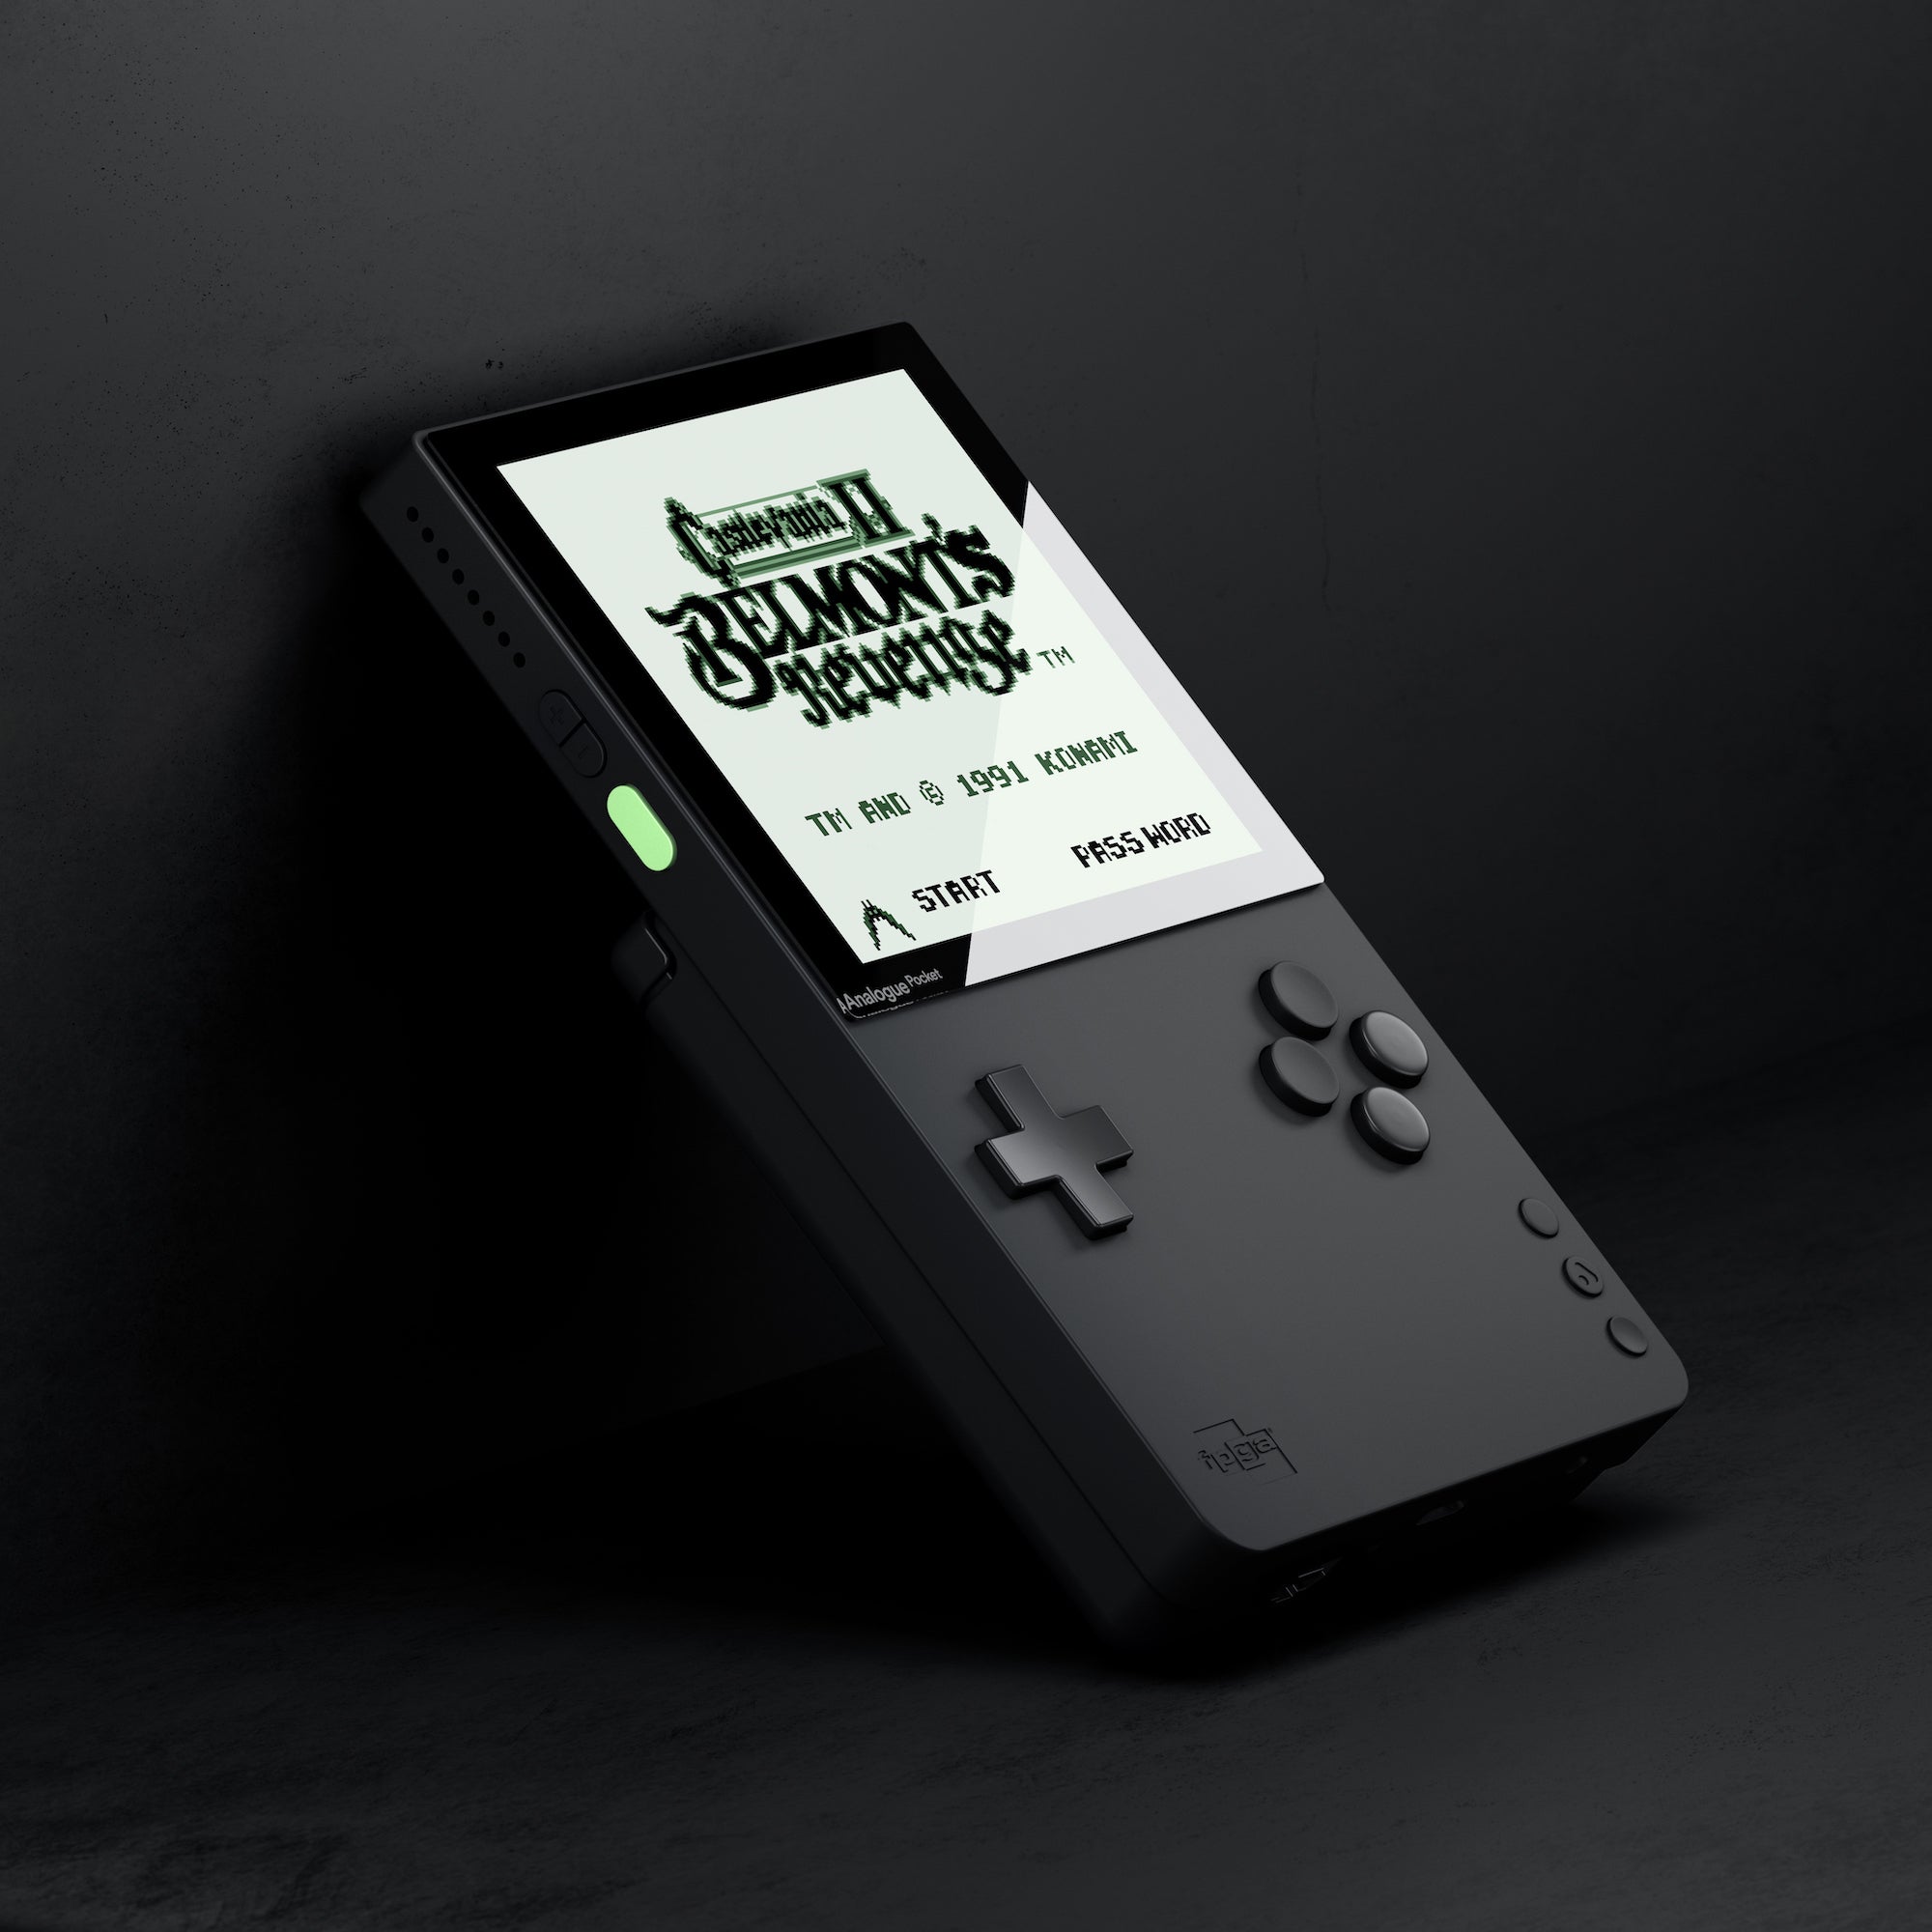 Image for The Analogue Pocket looks like a handheld retro gaming dream